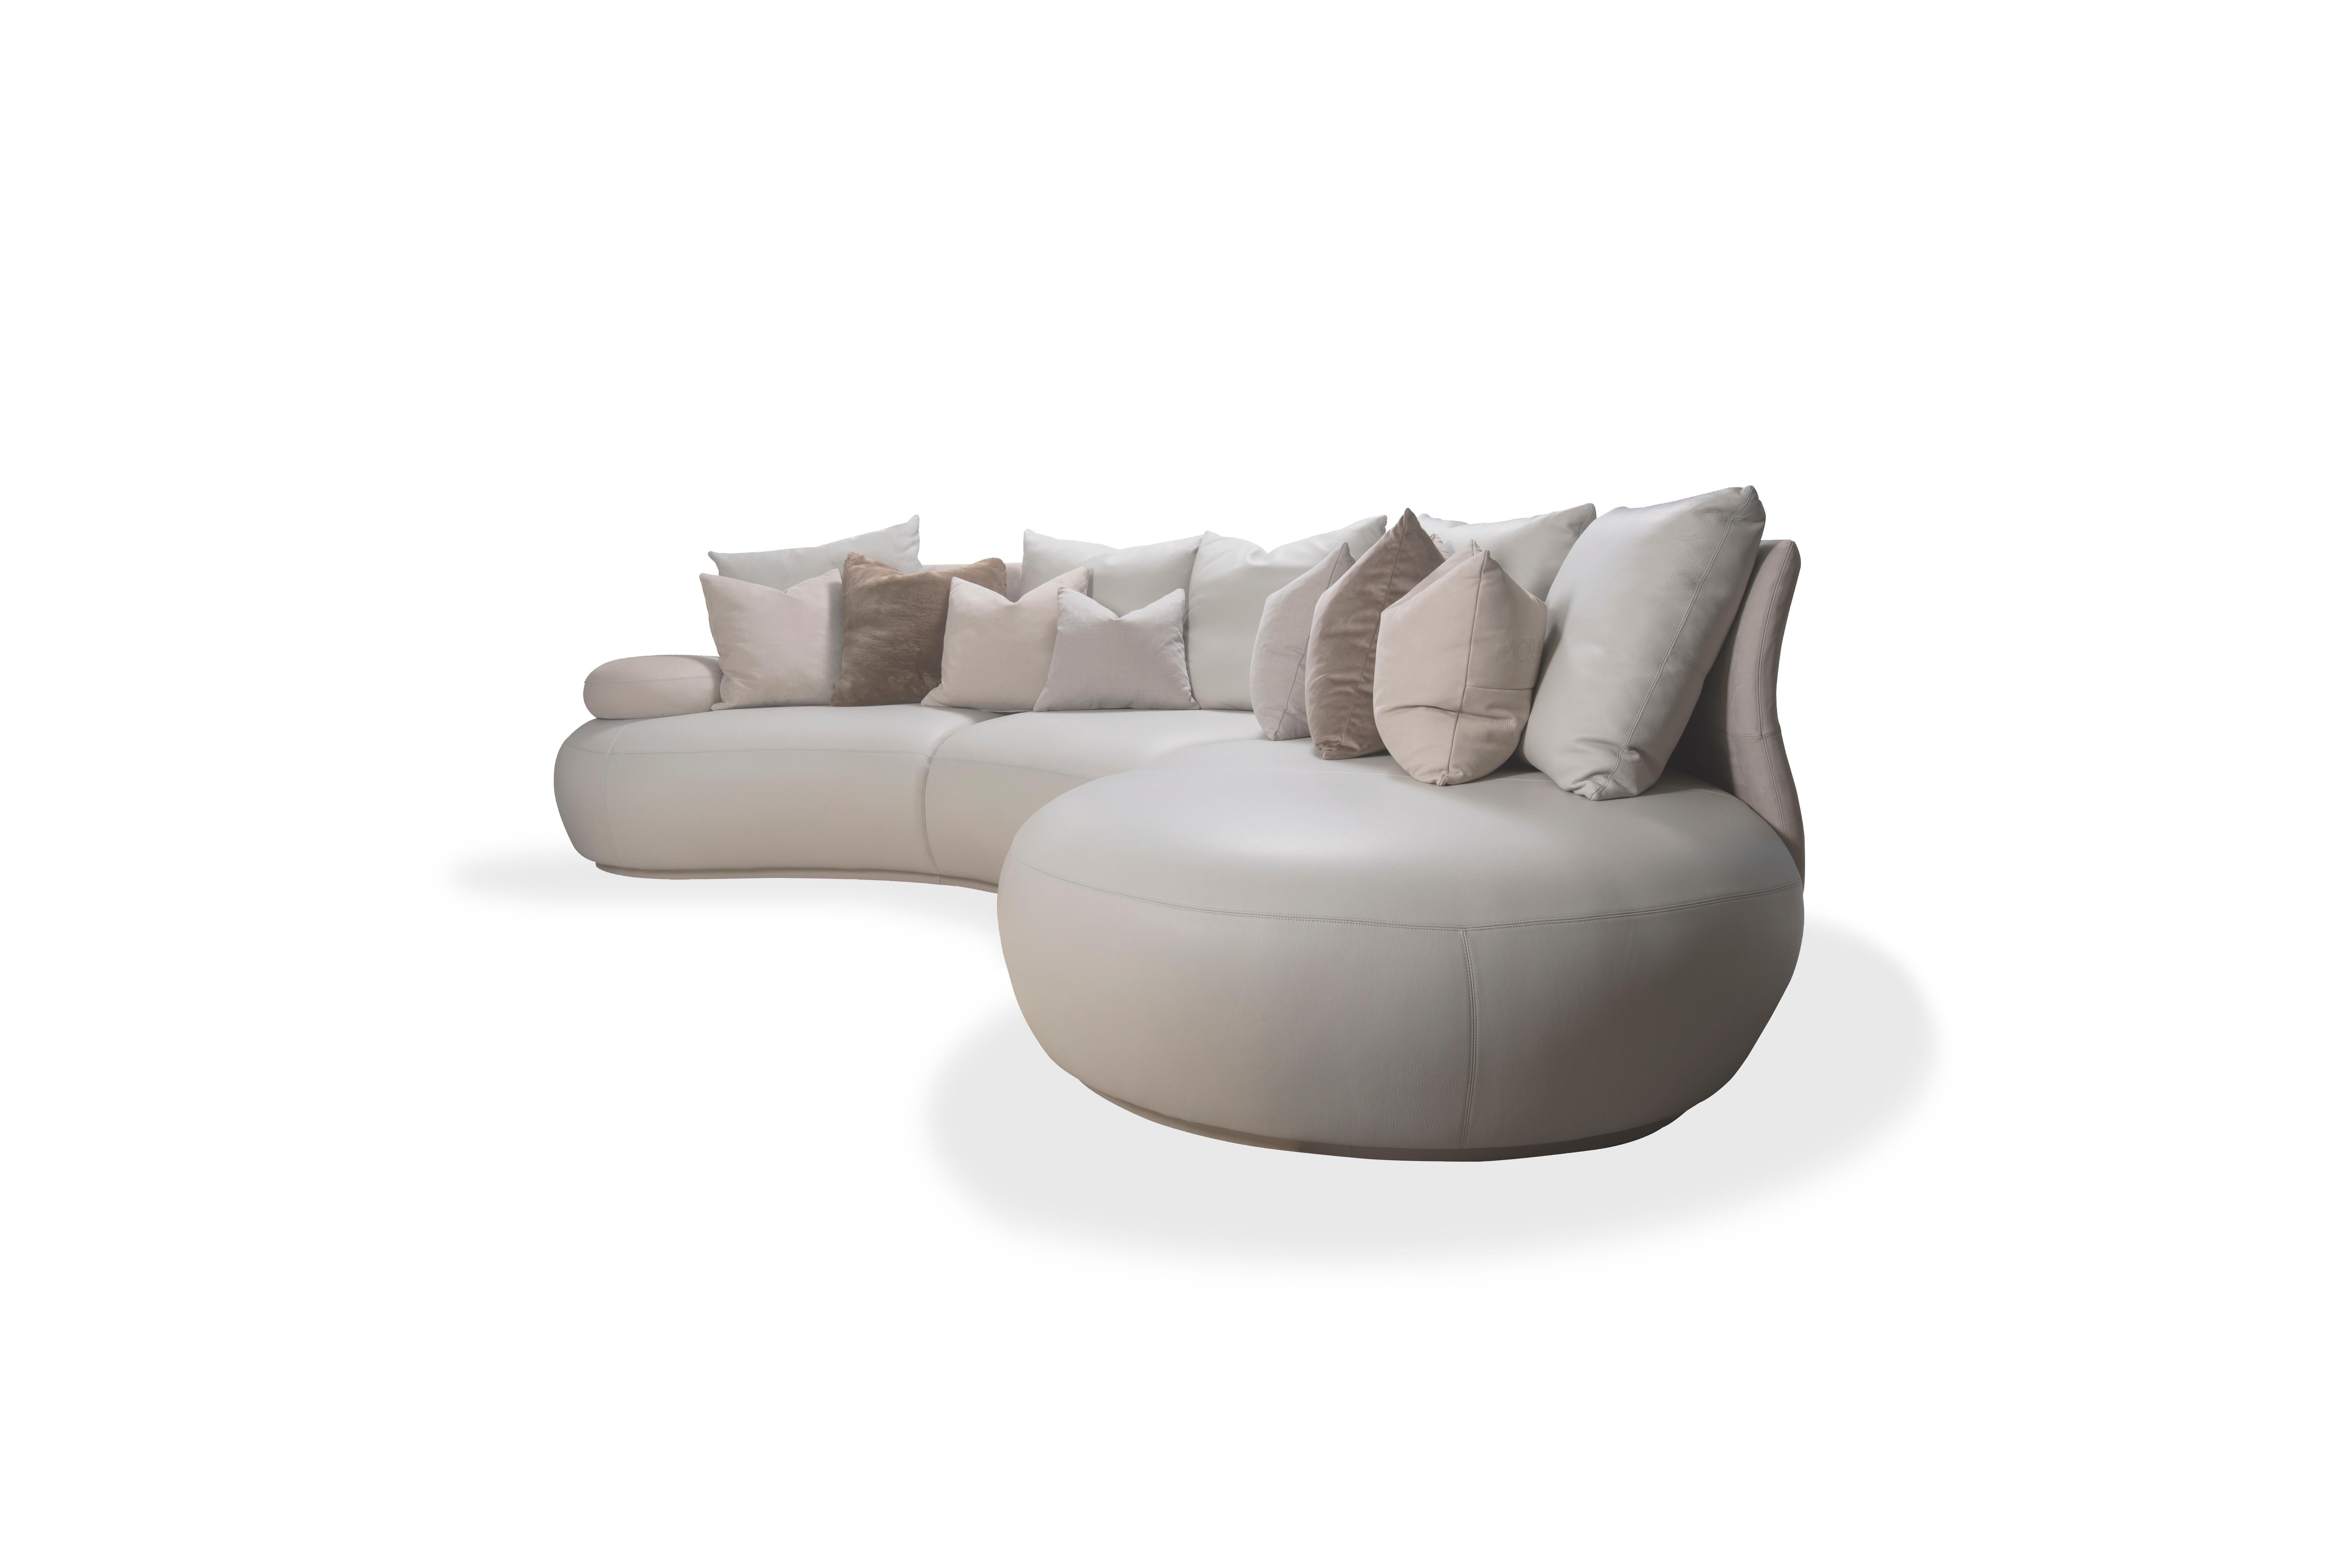 The soft rolling lines following through the entire design of structure and upholstery determine the inviting organic feel of this oversized sofa. The curved back seamlessly transitions into the armrest on one side and into an extensive round chaise